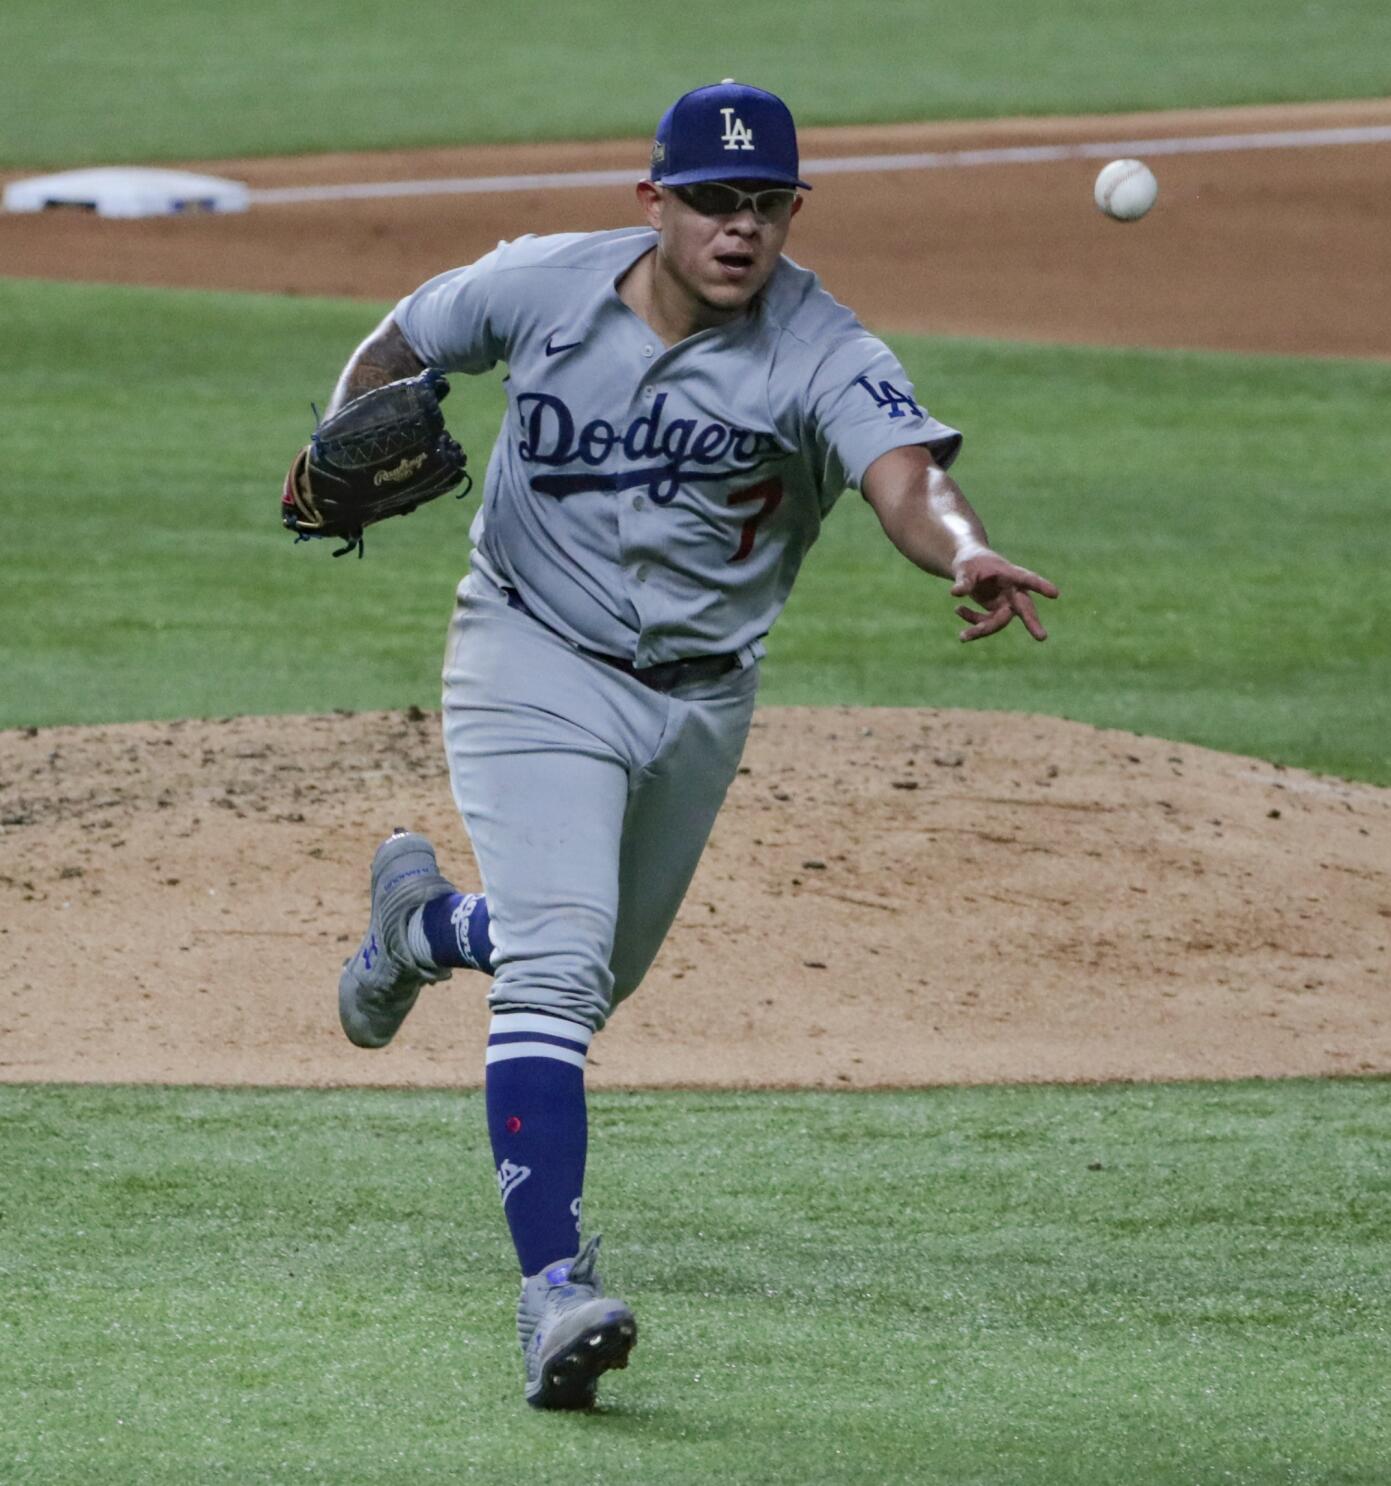 World Series line, prediction: Dodgers to win Game 4 behind Urias